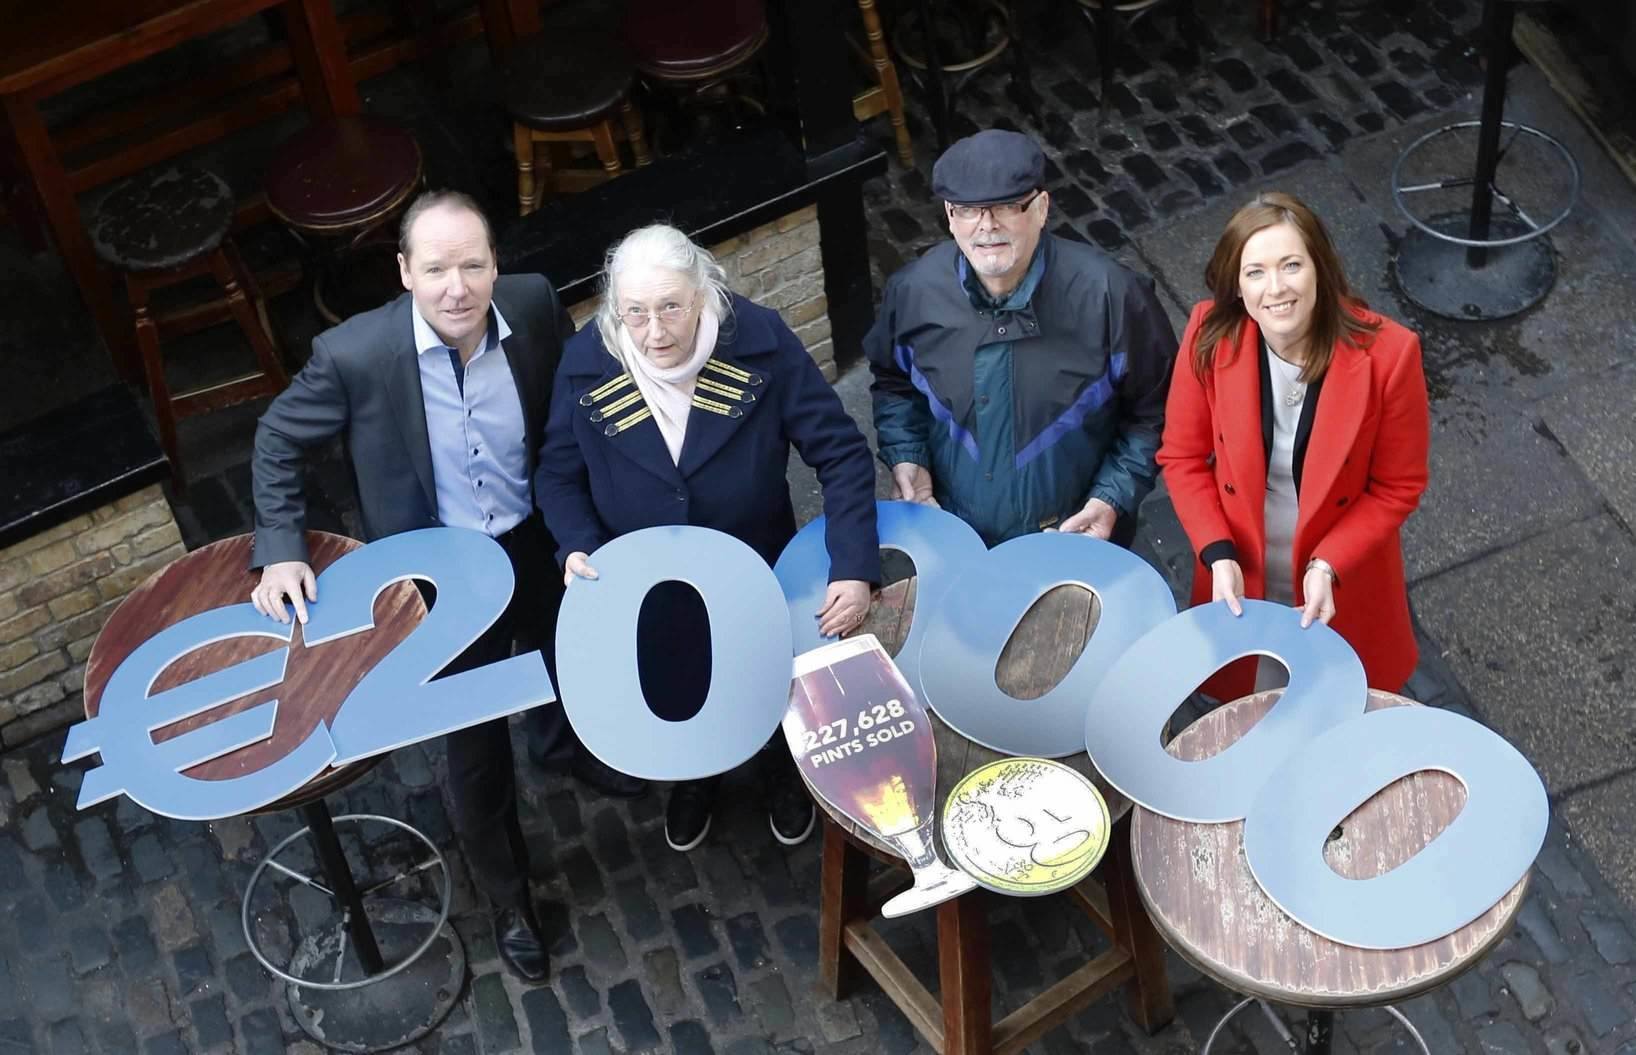 From left: LVA Chairman John Gleeson, Alone Service users Annette Egan and Christopher Jackson with Diageo Sales Director Ann-Marie Phillips at the Brazen Head pub where the LVA announced It had raised €200,000 for Alone to celebrate 200 years of Dublin Pubs.